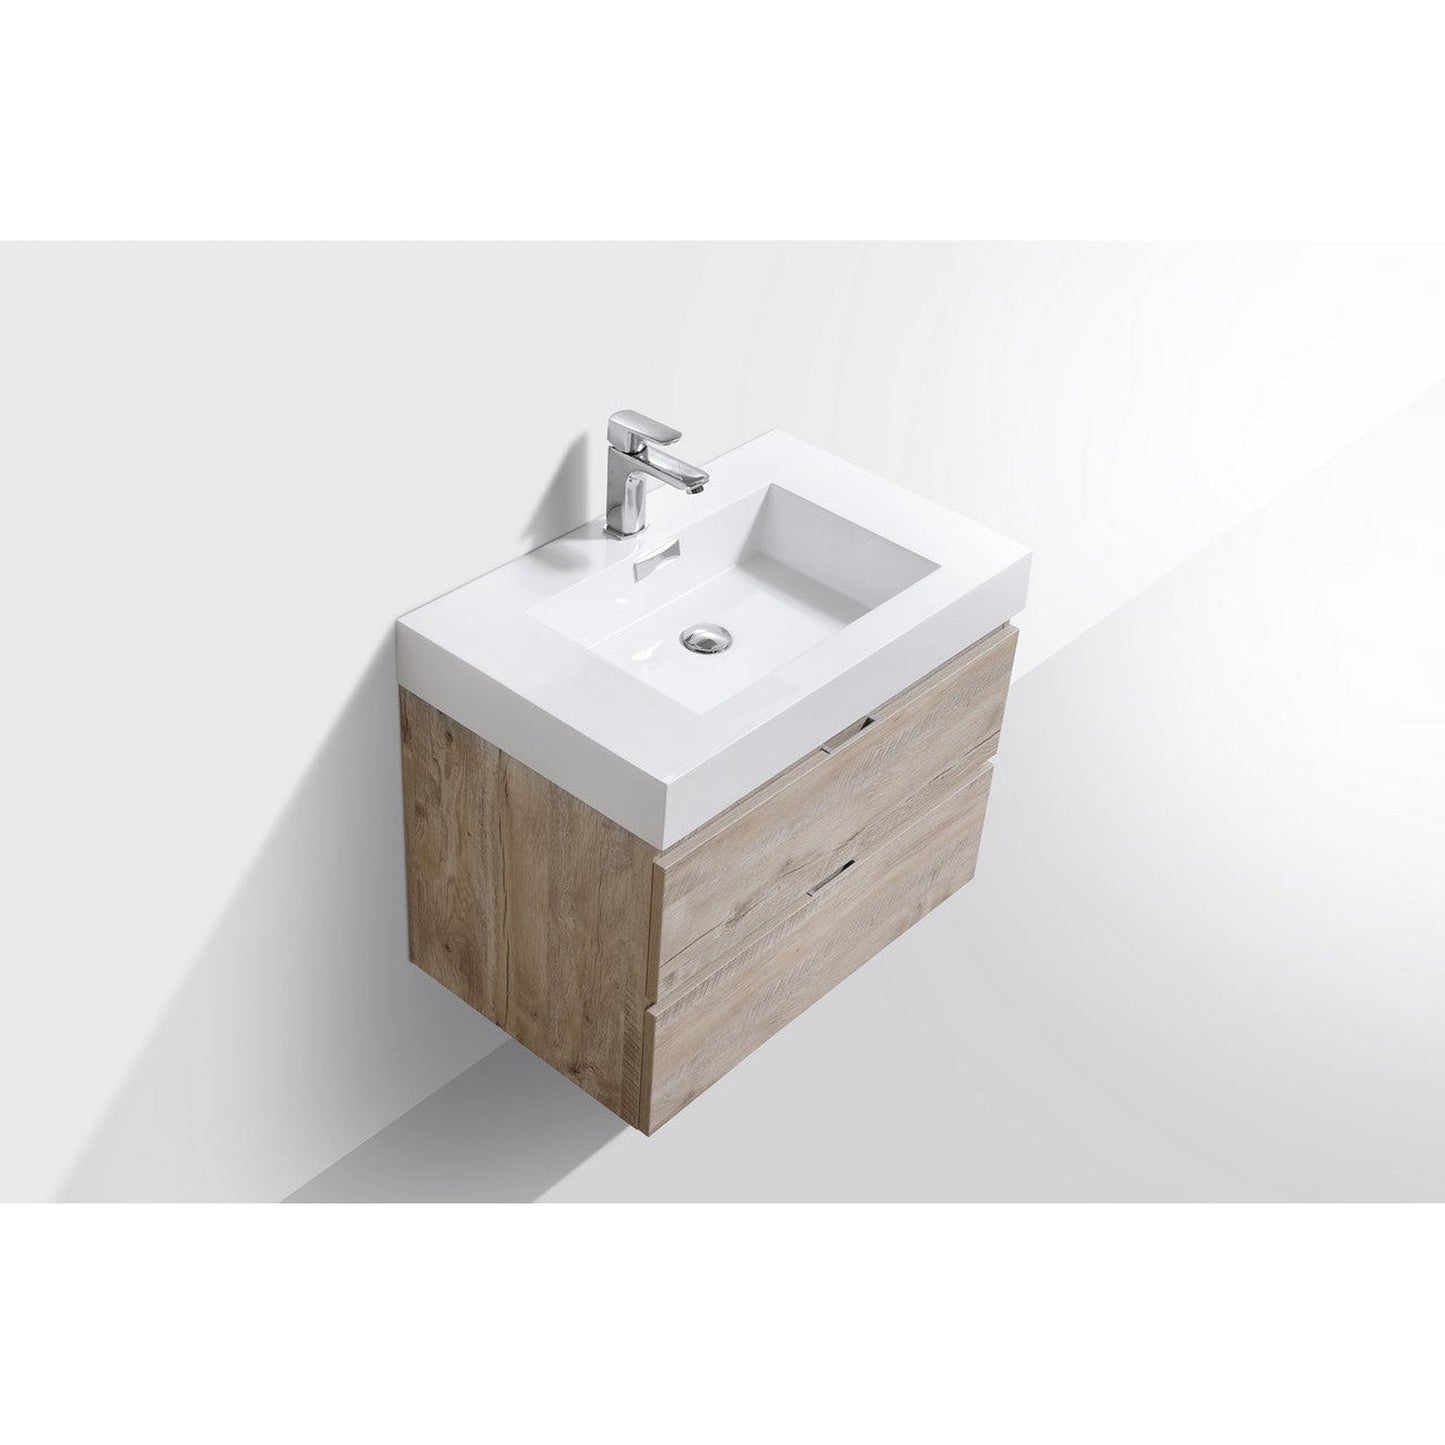 KubeBath Bliss 30" Nature Wood Wall-Mounted Modern Bathroom Vanity With Single Integrated Acrylic Sink With Overflow and 30" Wood Framed Mirror With Shelf